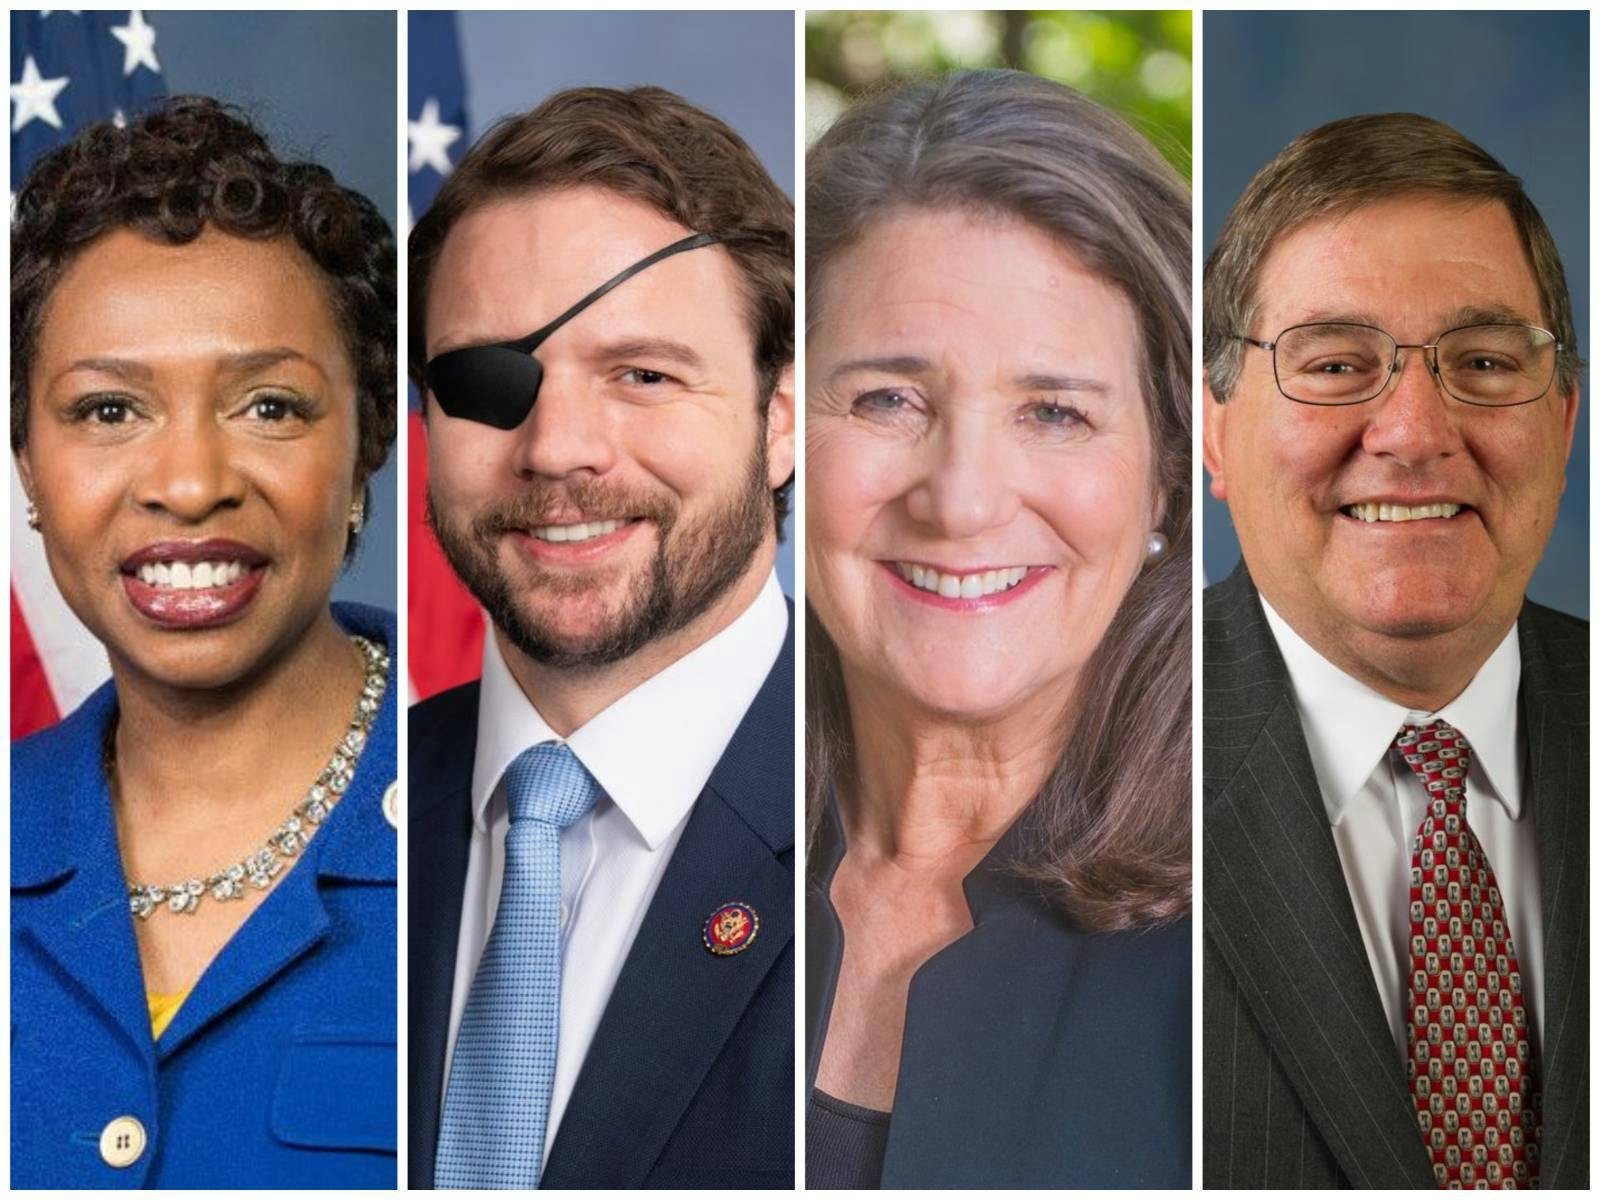 From left, U.S. Reps. Yvette Clarke, Dan Crenshaw, Diana DeGette, and Michael Burgess have sponsored a bill to block billions in Medicaid cuts to hospitals. (Photos: U.S. House of Representatives)